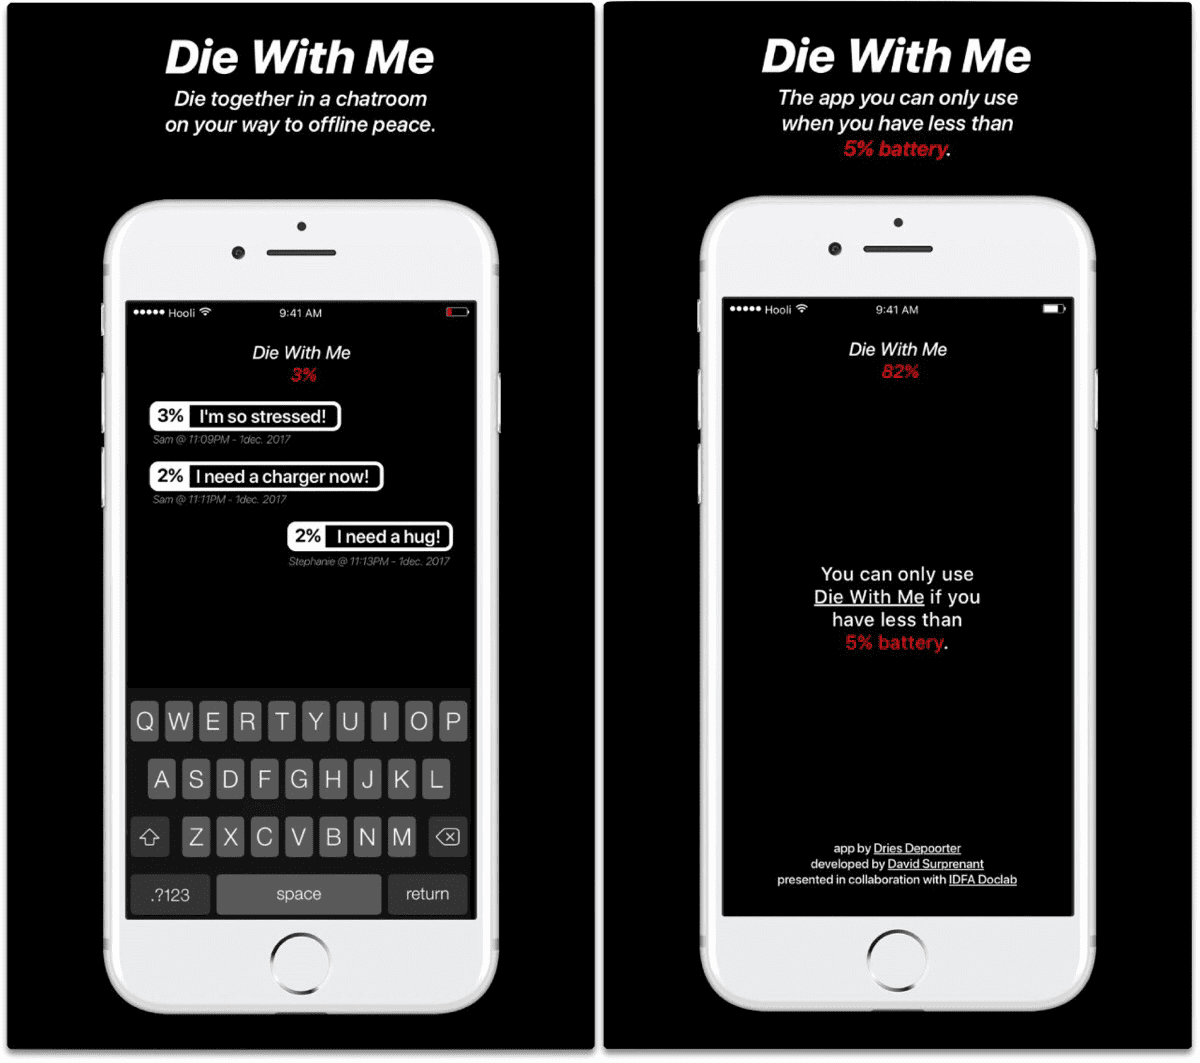 Screenshots of Die With Me low battery chat app. 